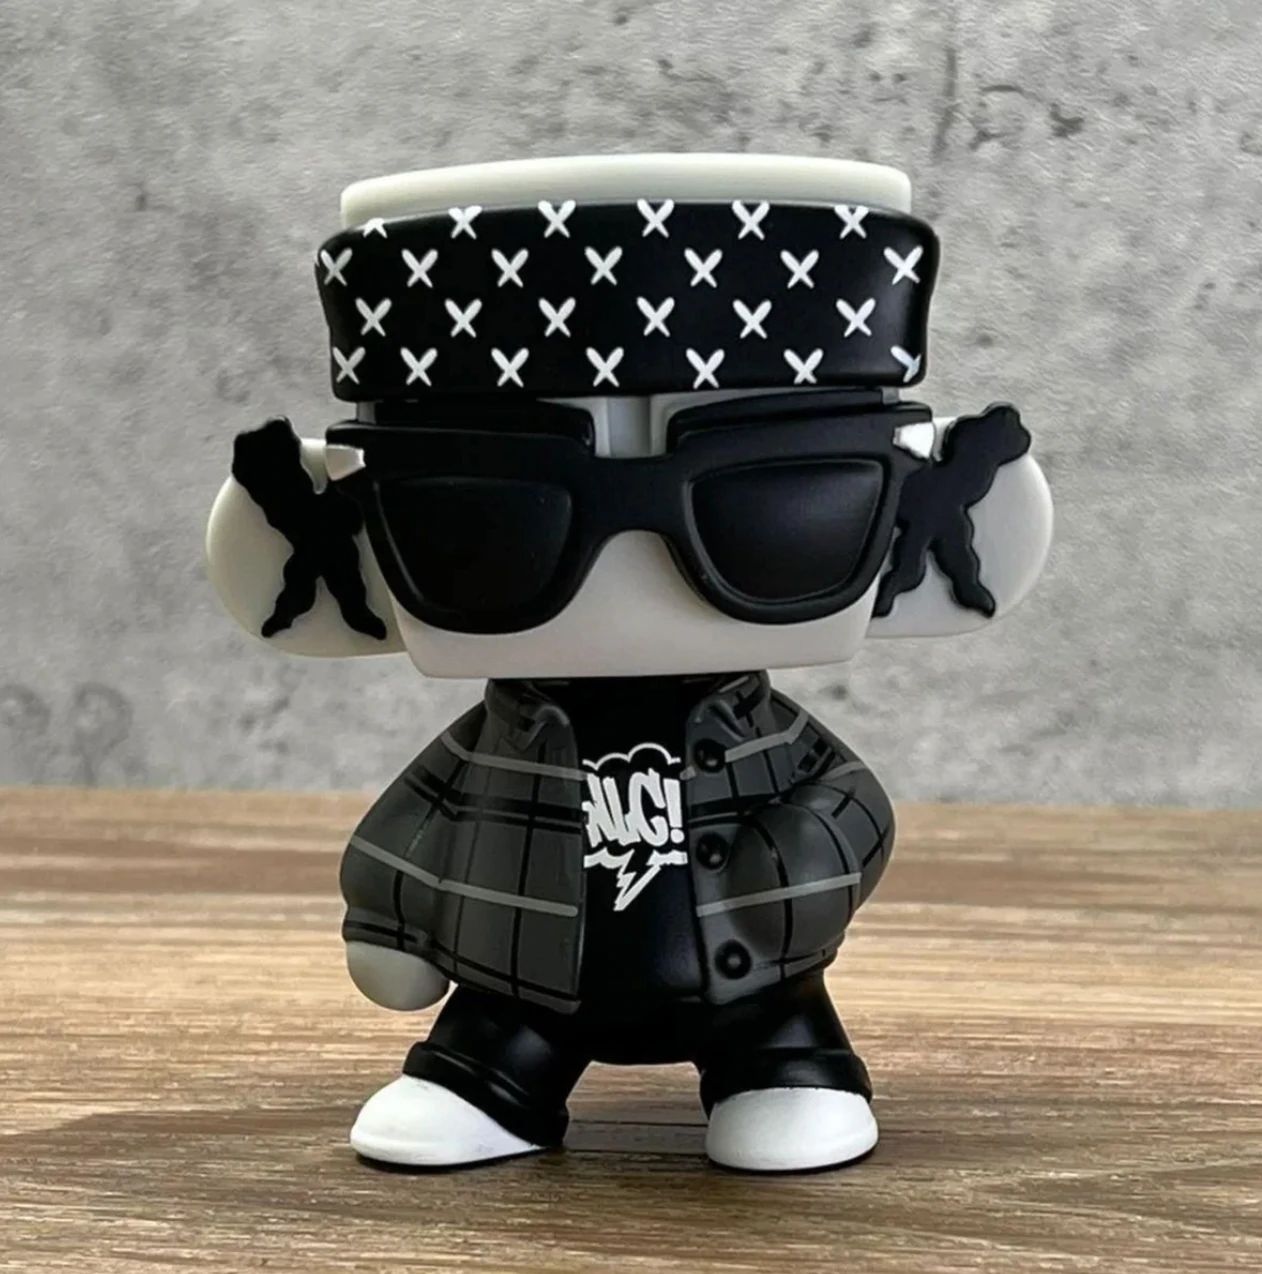 MAD*L Citizens Skin Deep Edition 4-inch vinyl figure by MAD x UVD Toys Available Now